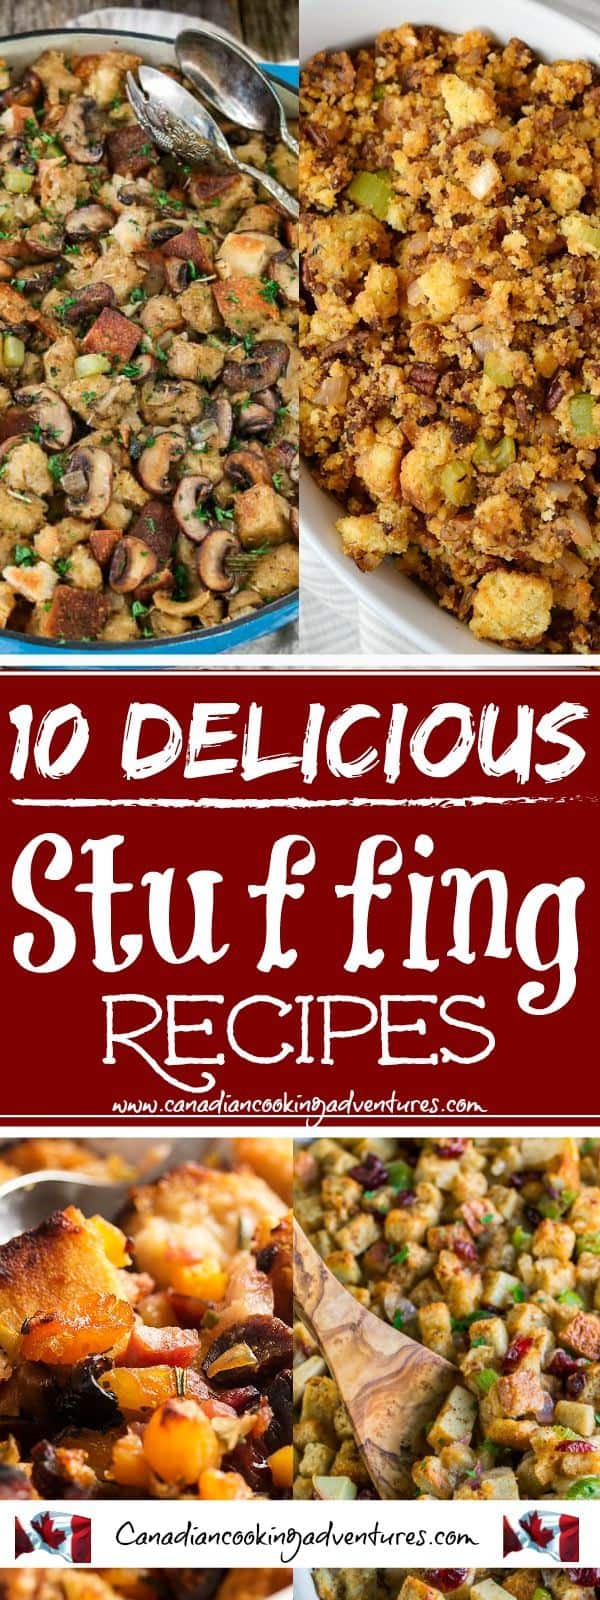 10 Delicious Stuffing Recipes